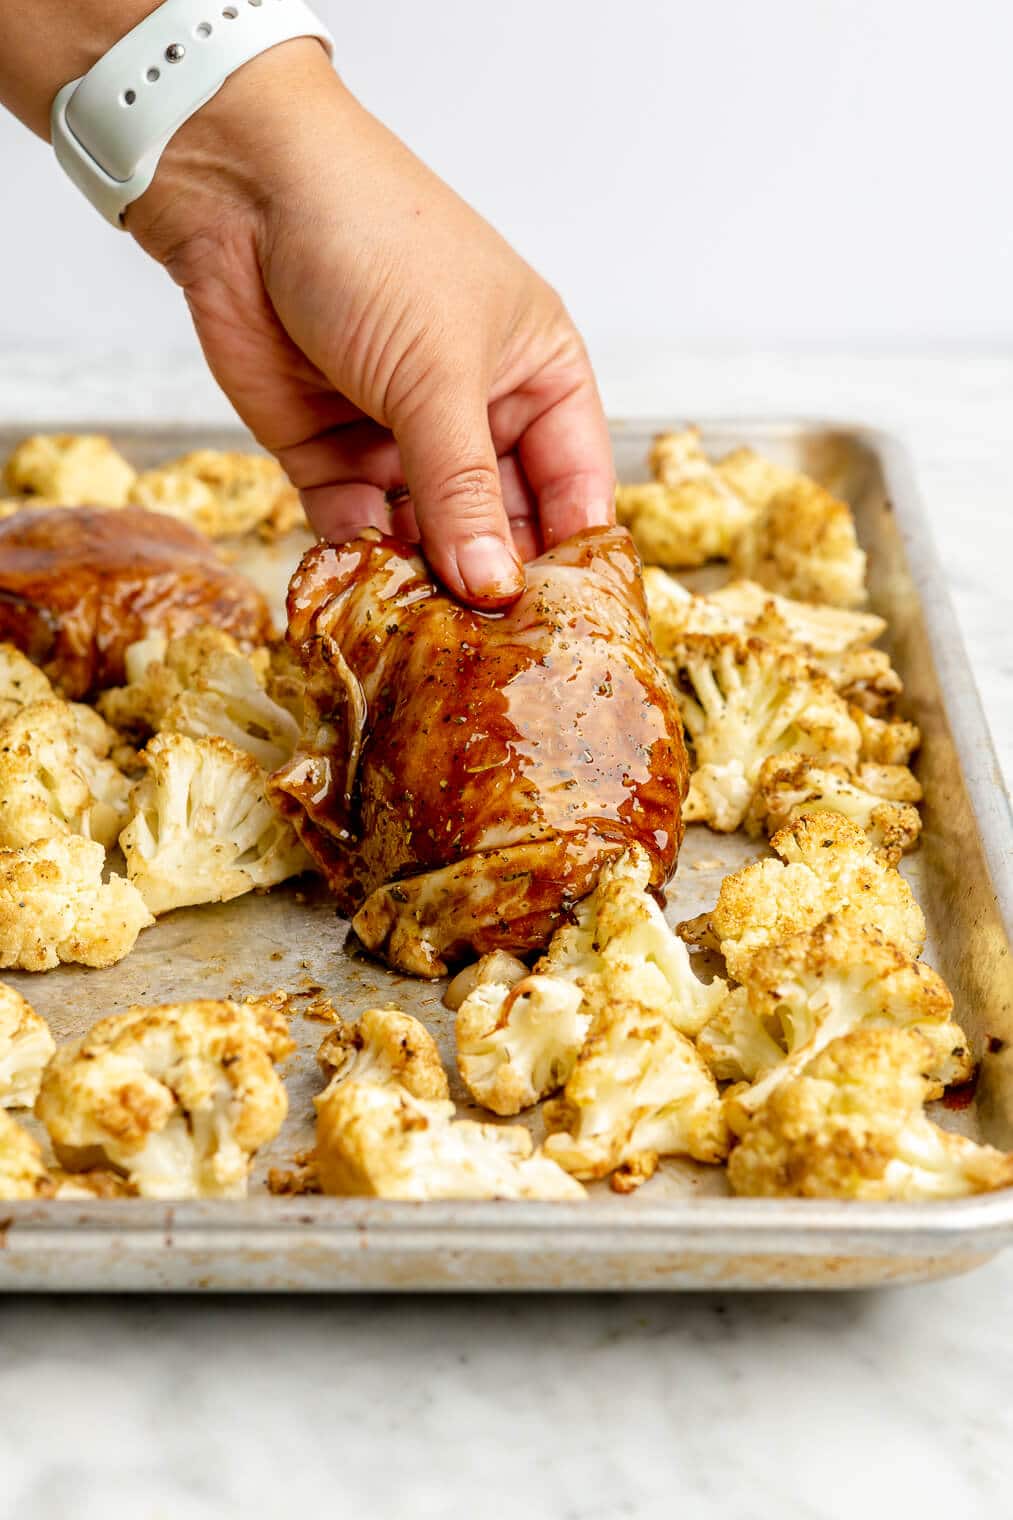 A person placing a raw balsamic coated chicken thigh onto a sheet pan with cauliflower.